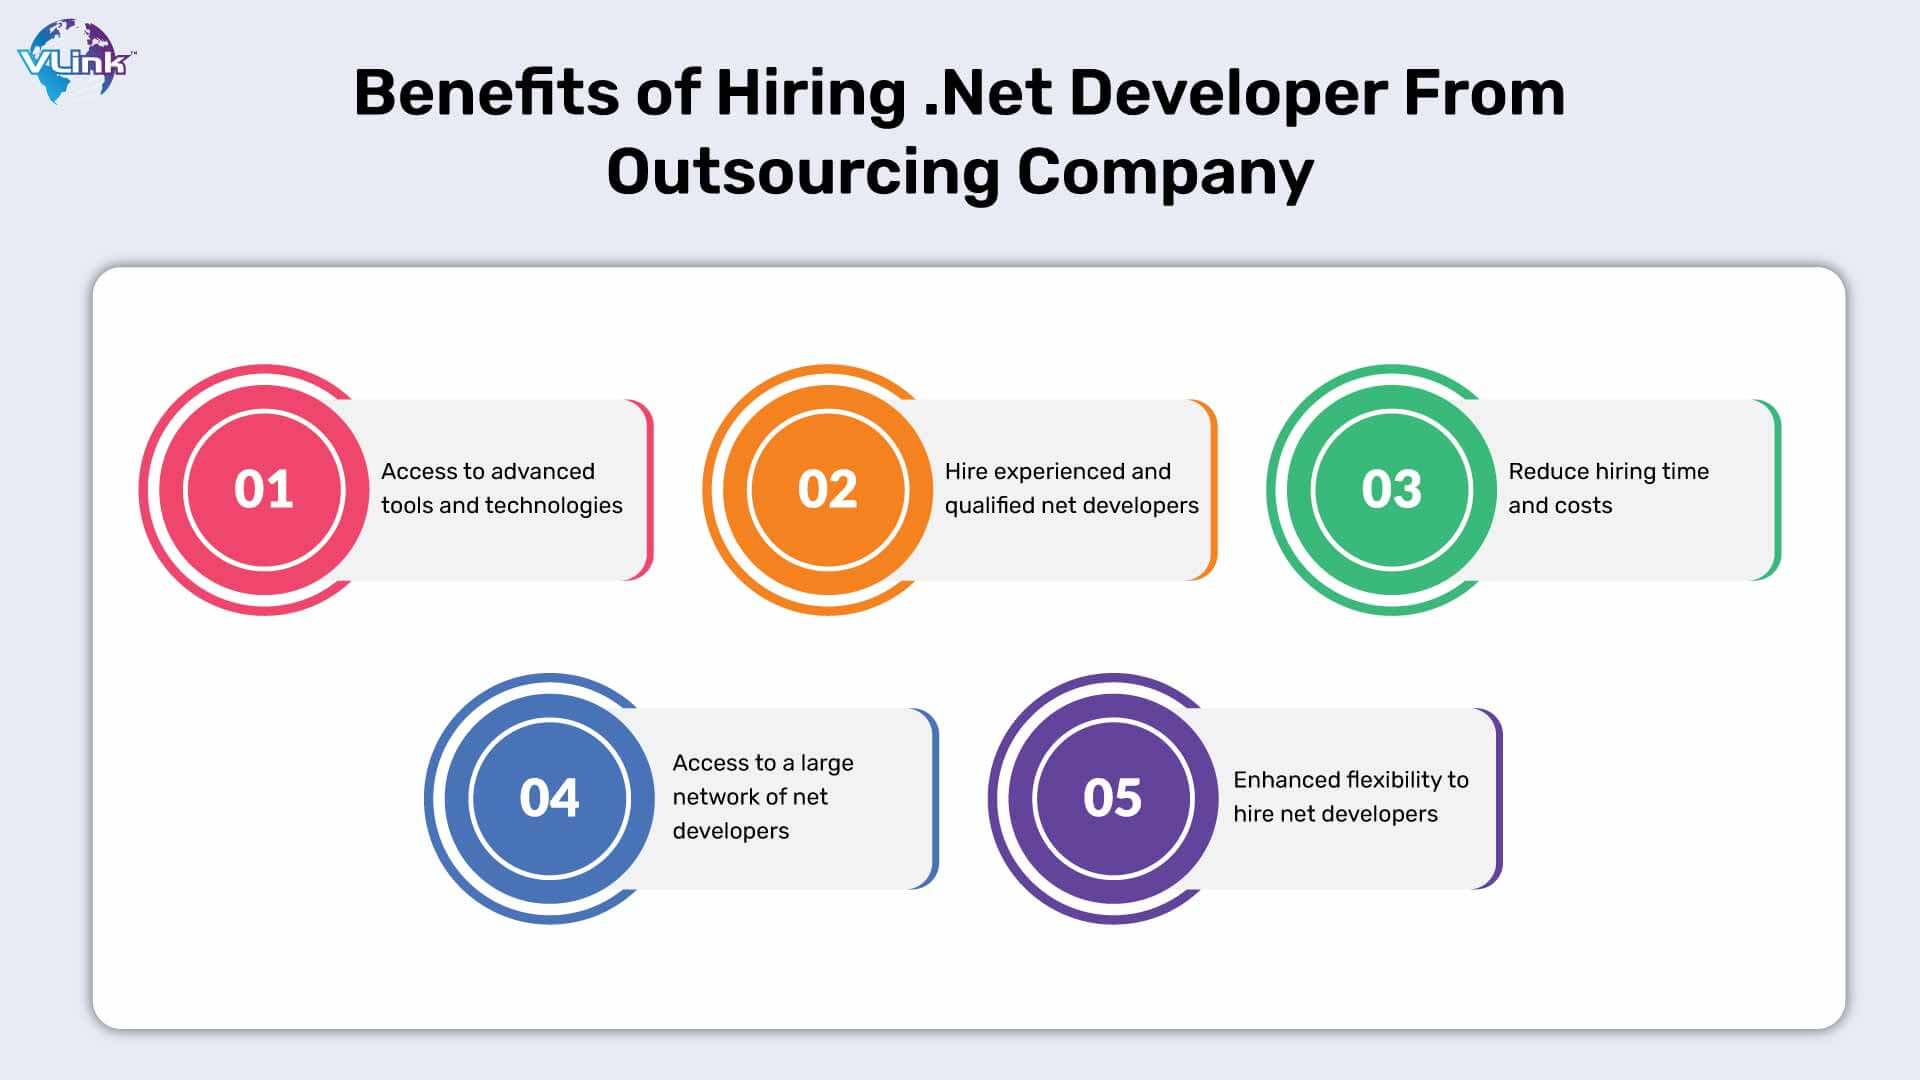 Why Should You Outsource to Hire .Net Developer